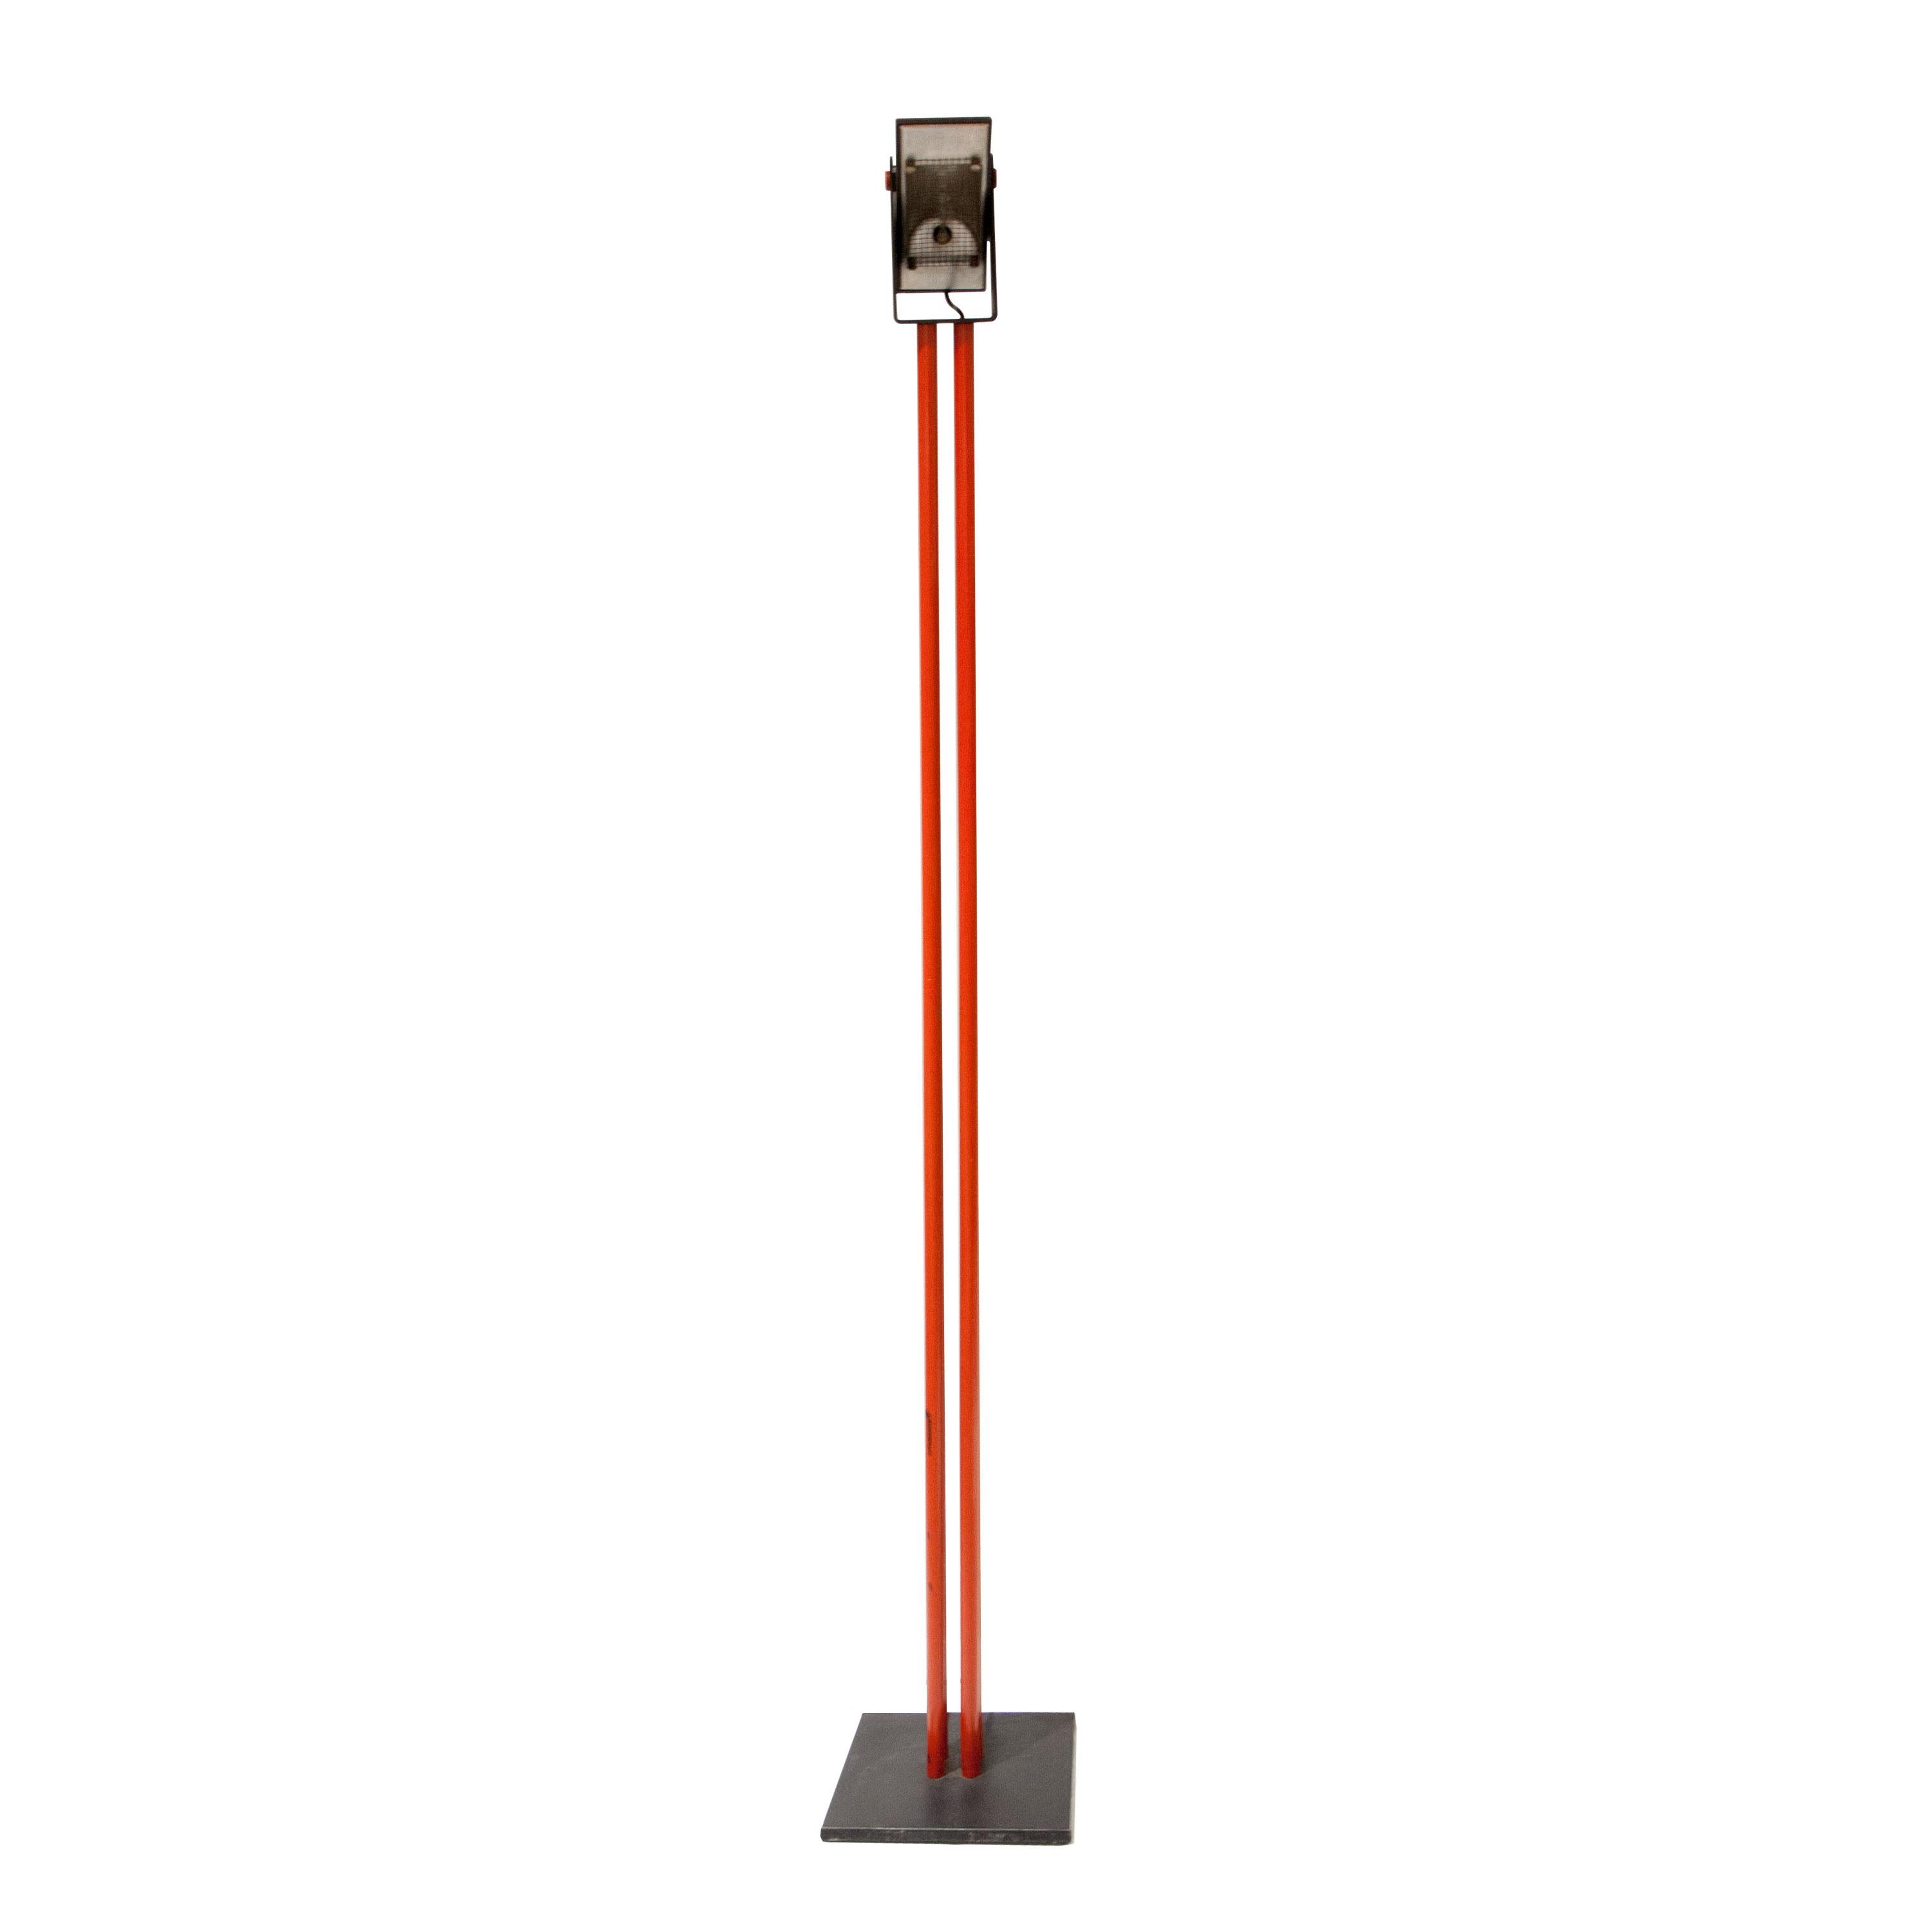 Memphis style halogen floor lamp. The lamp is composed of a structure of four iron bars lacquered in red with a base and upper finish in black. At the top it has a mobile light point of adjustable intensity.